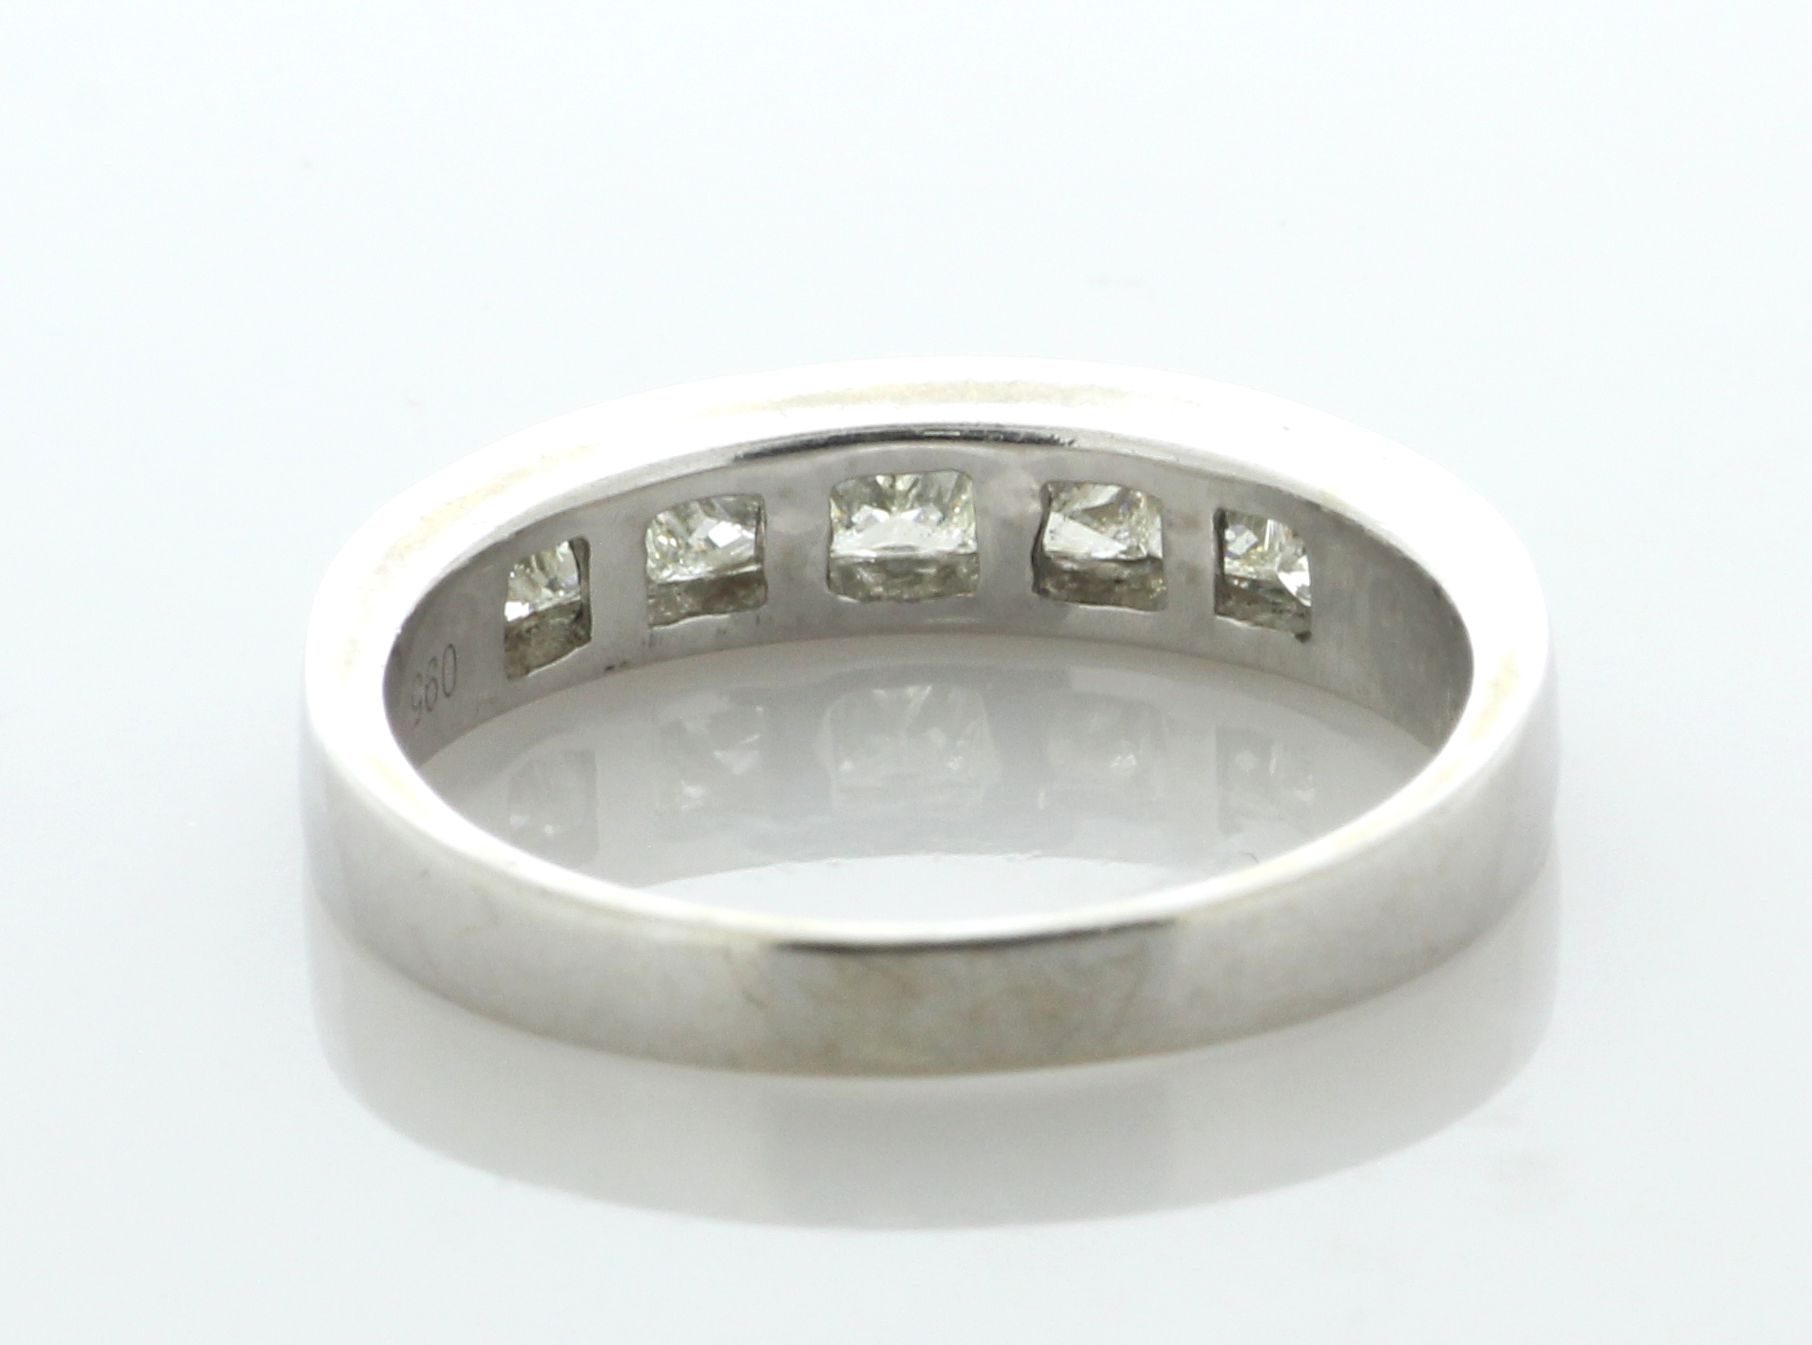 18ct White Gold Semi Eternity Diamond Ring 0.95 Carats - Valued By AGI £4,390.00 - Seven stone - Image 4 of 6